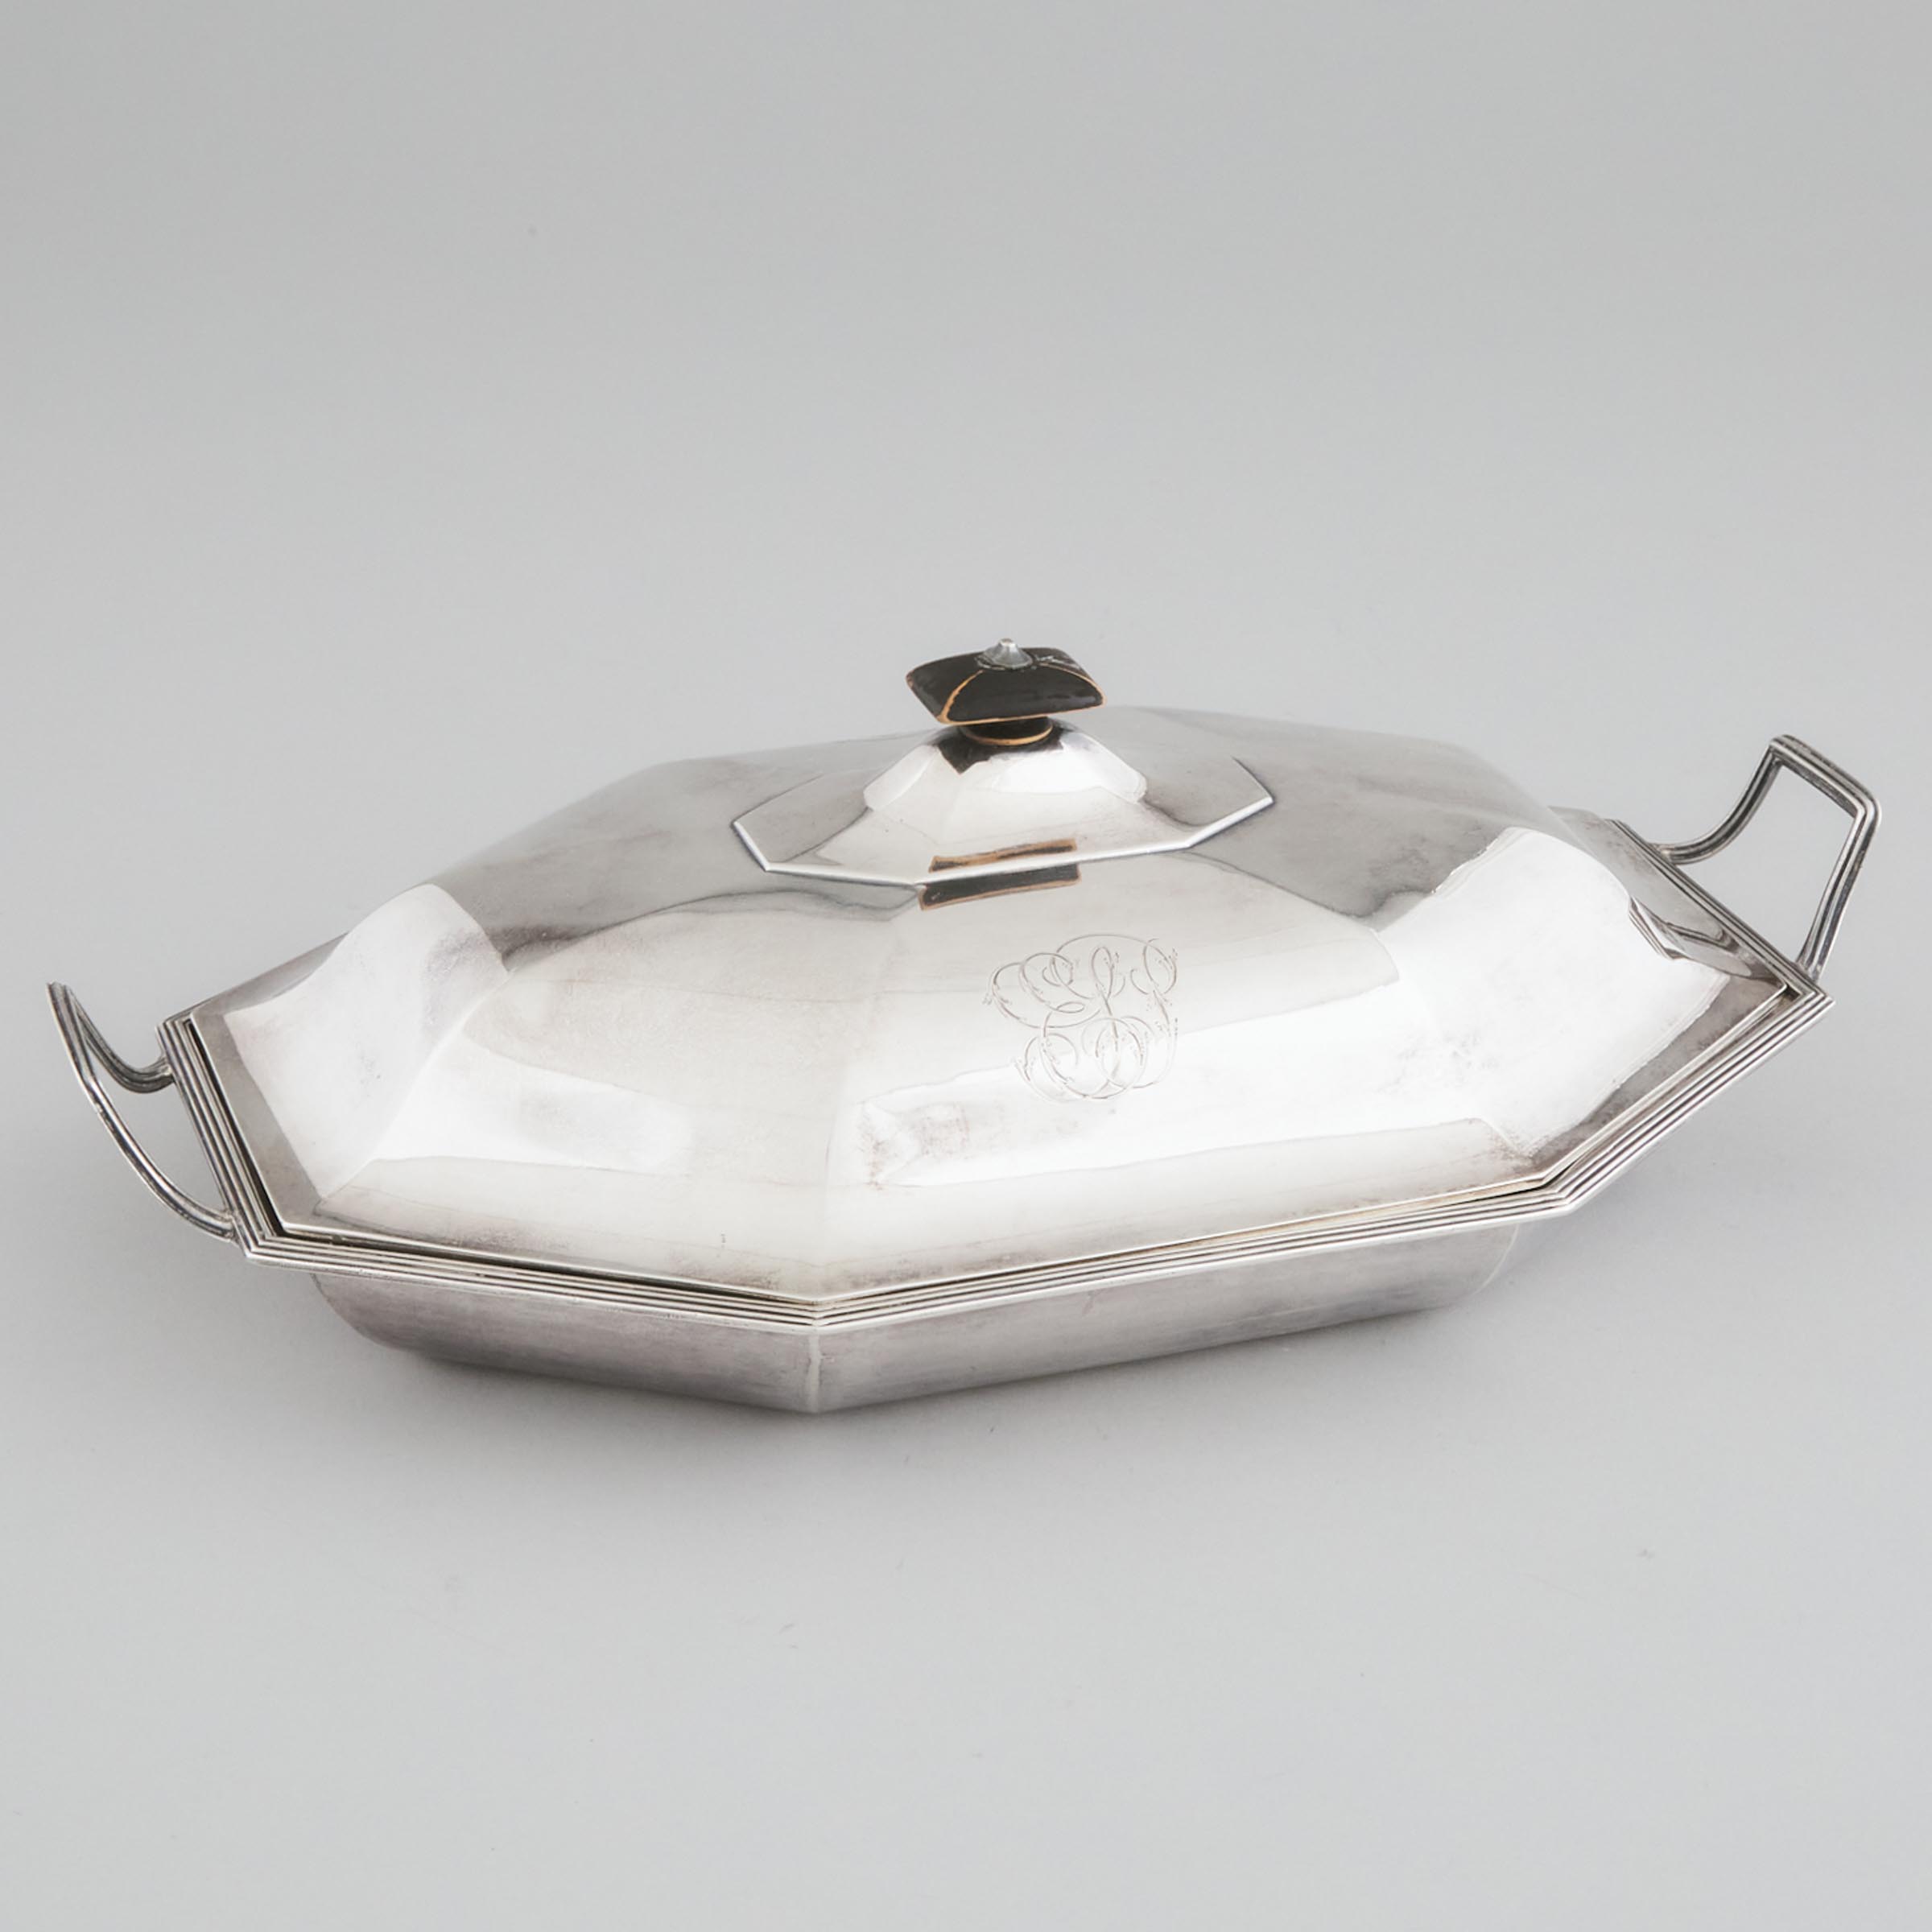 George III Silver Octagonal Shaped Entrée Dish and Cover, Abraham Peterson & Peter Podio, London, 1788